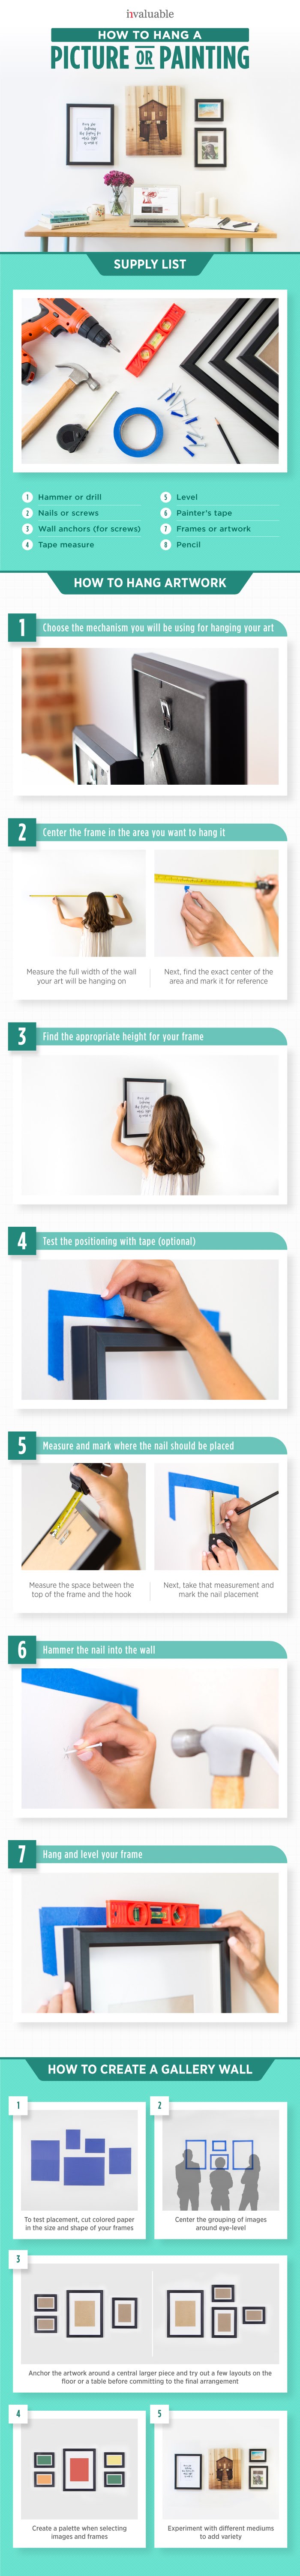 How to Hang a Picture or Painting #Infographic